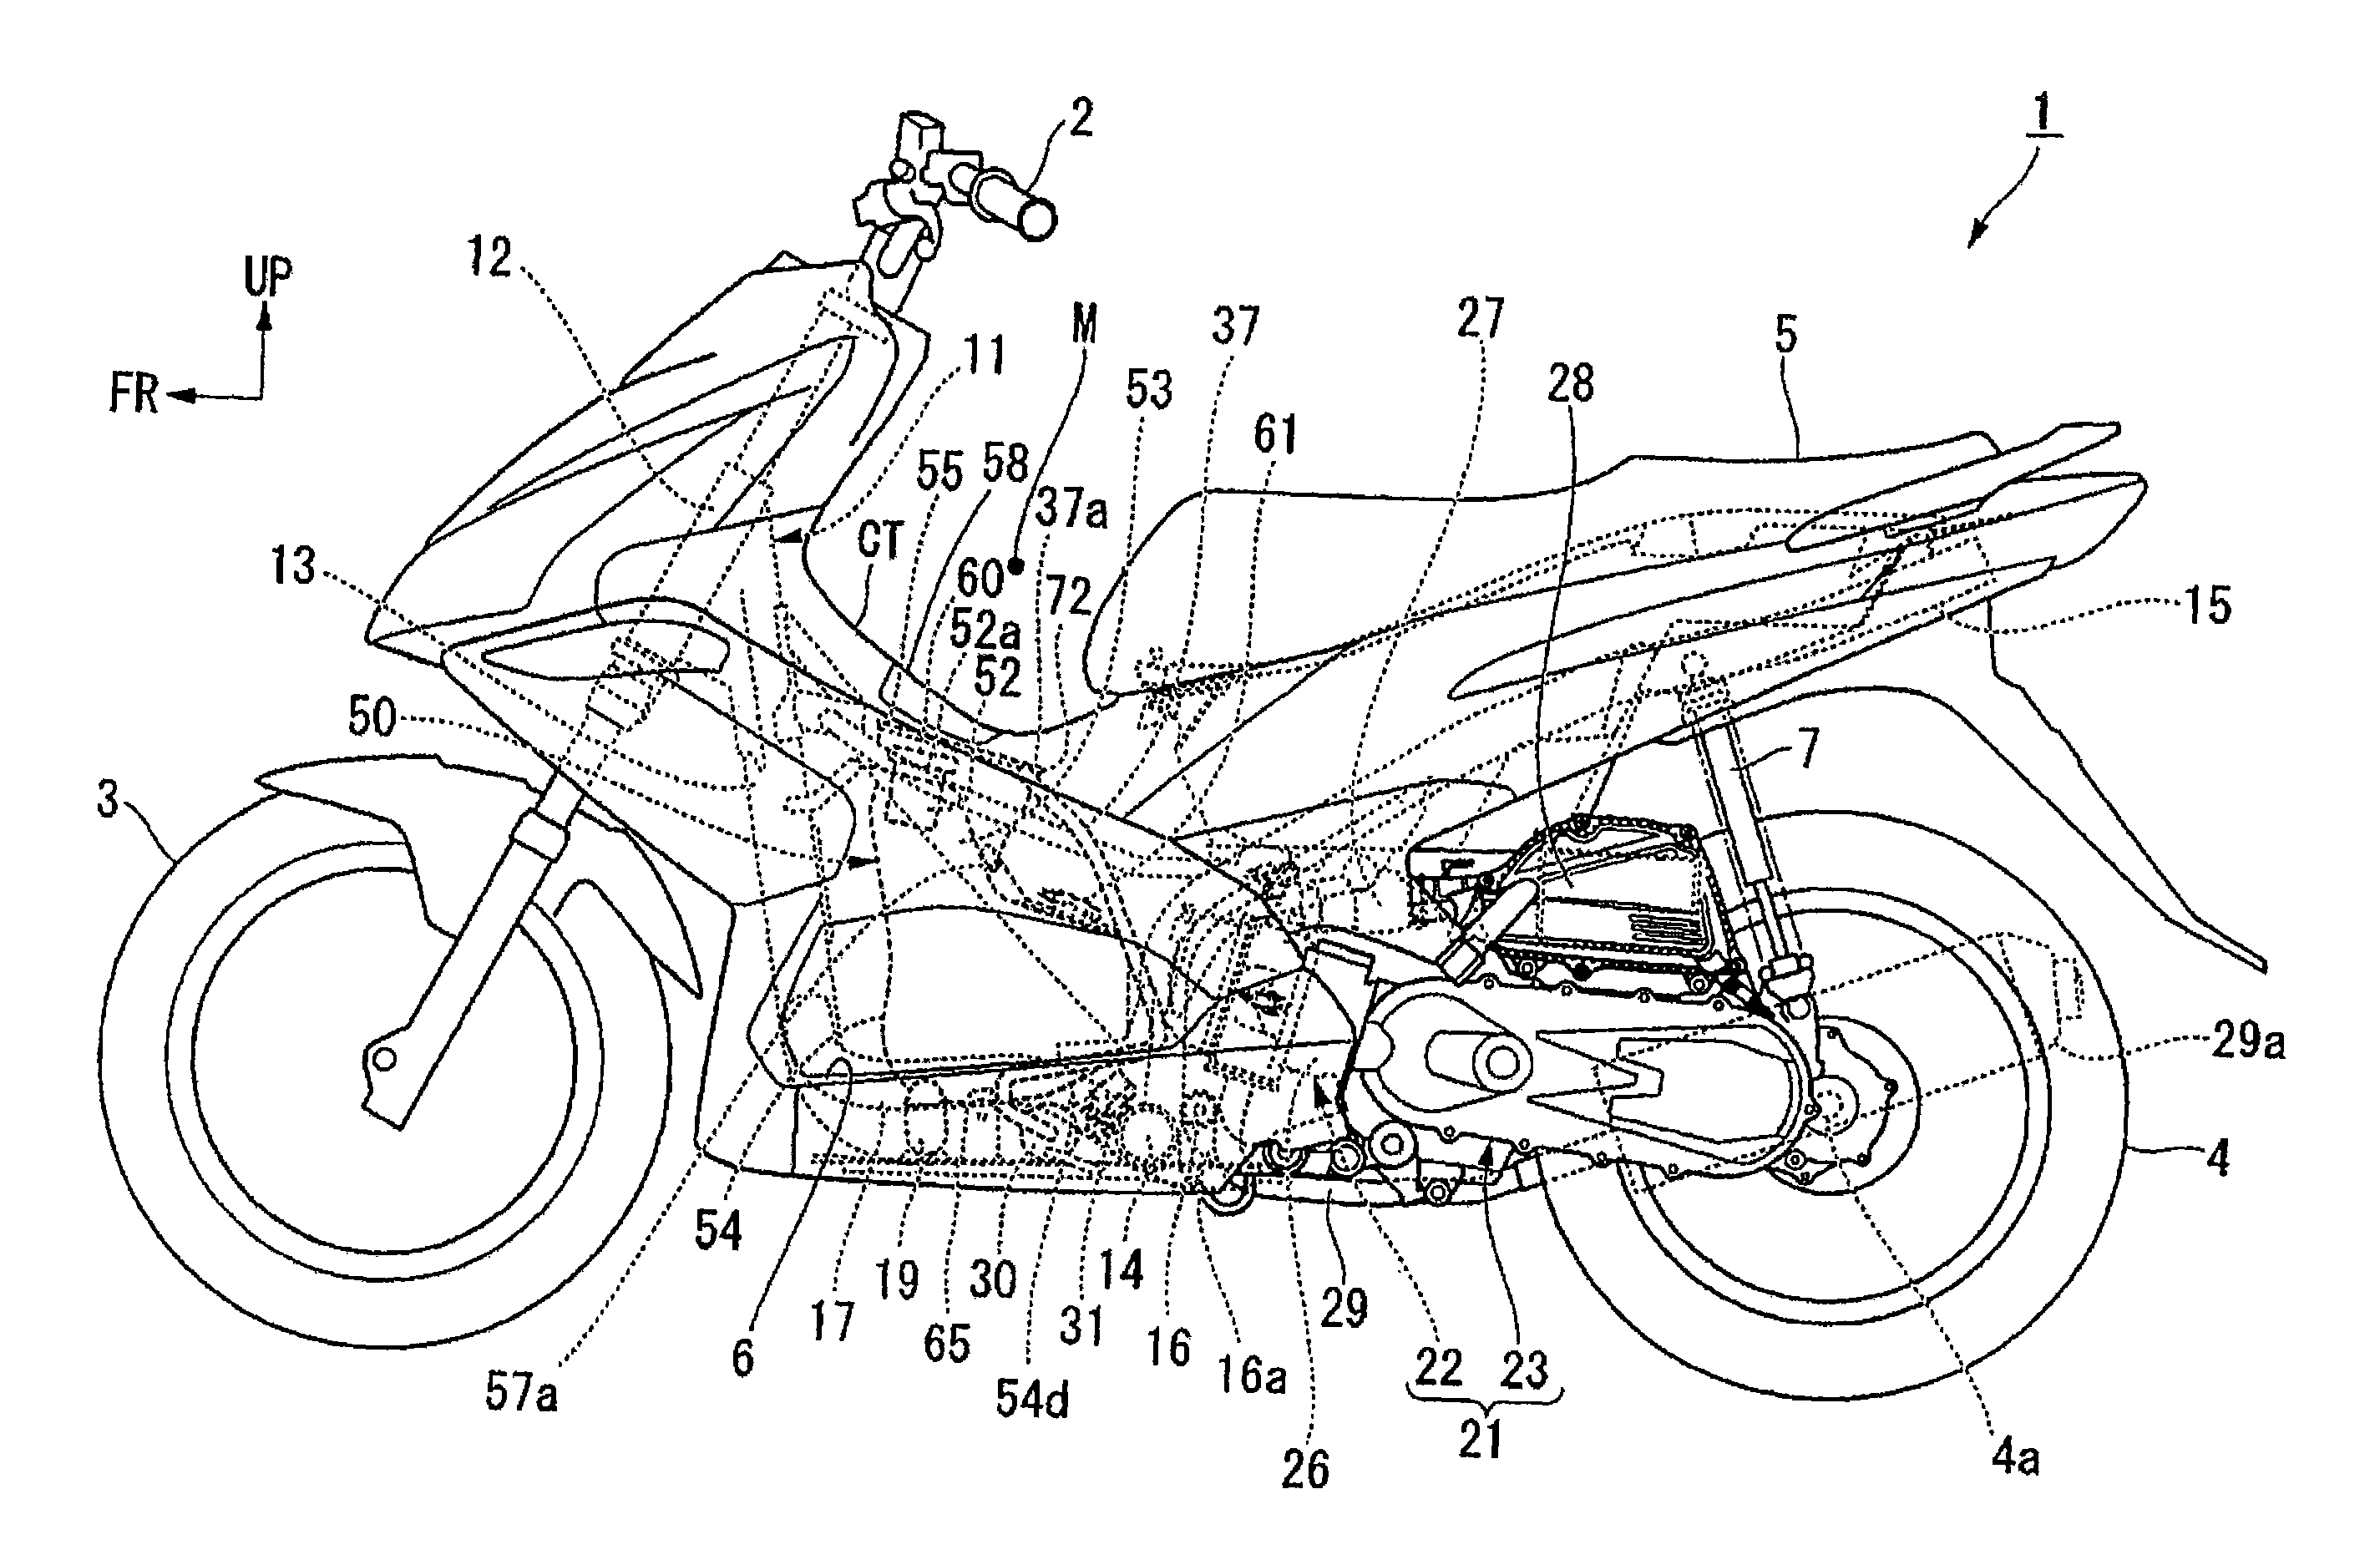 Arrangement structure for canister of saddle type vehicle